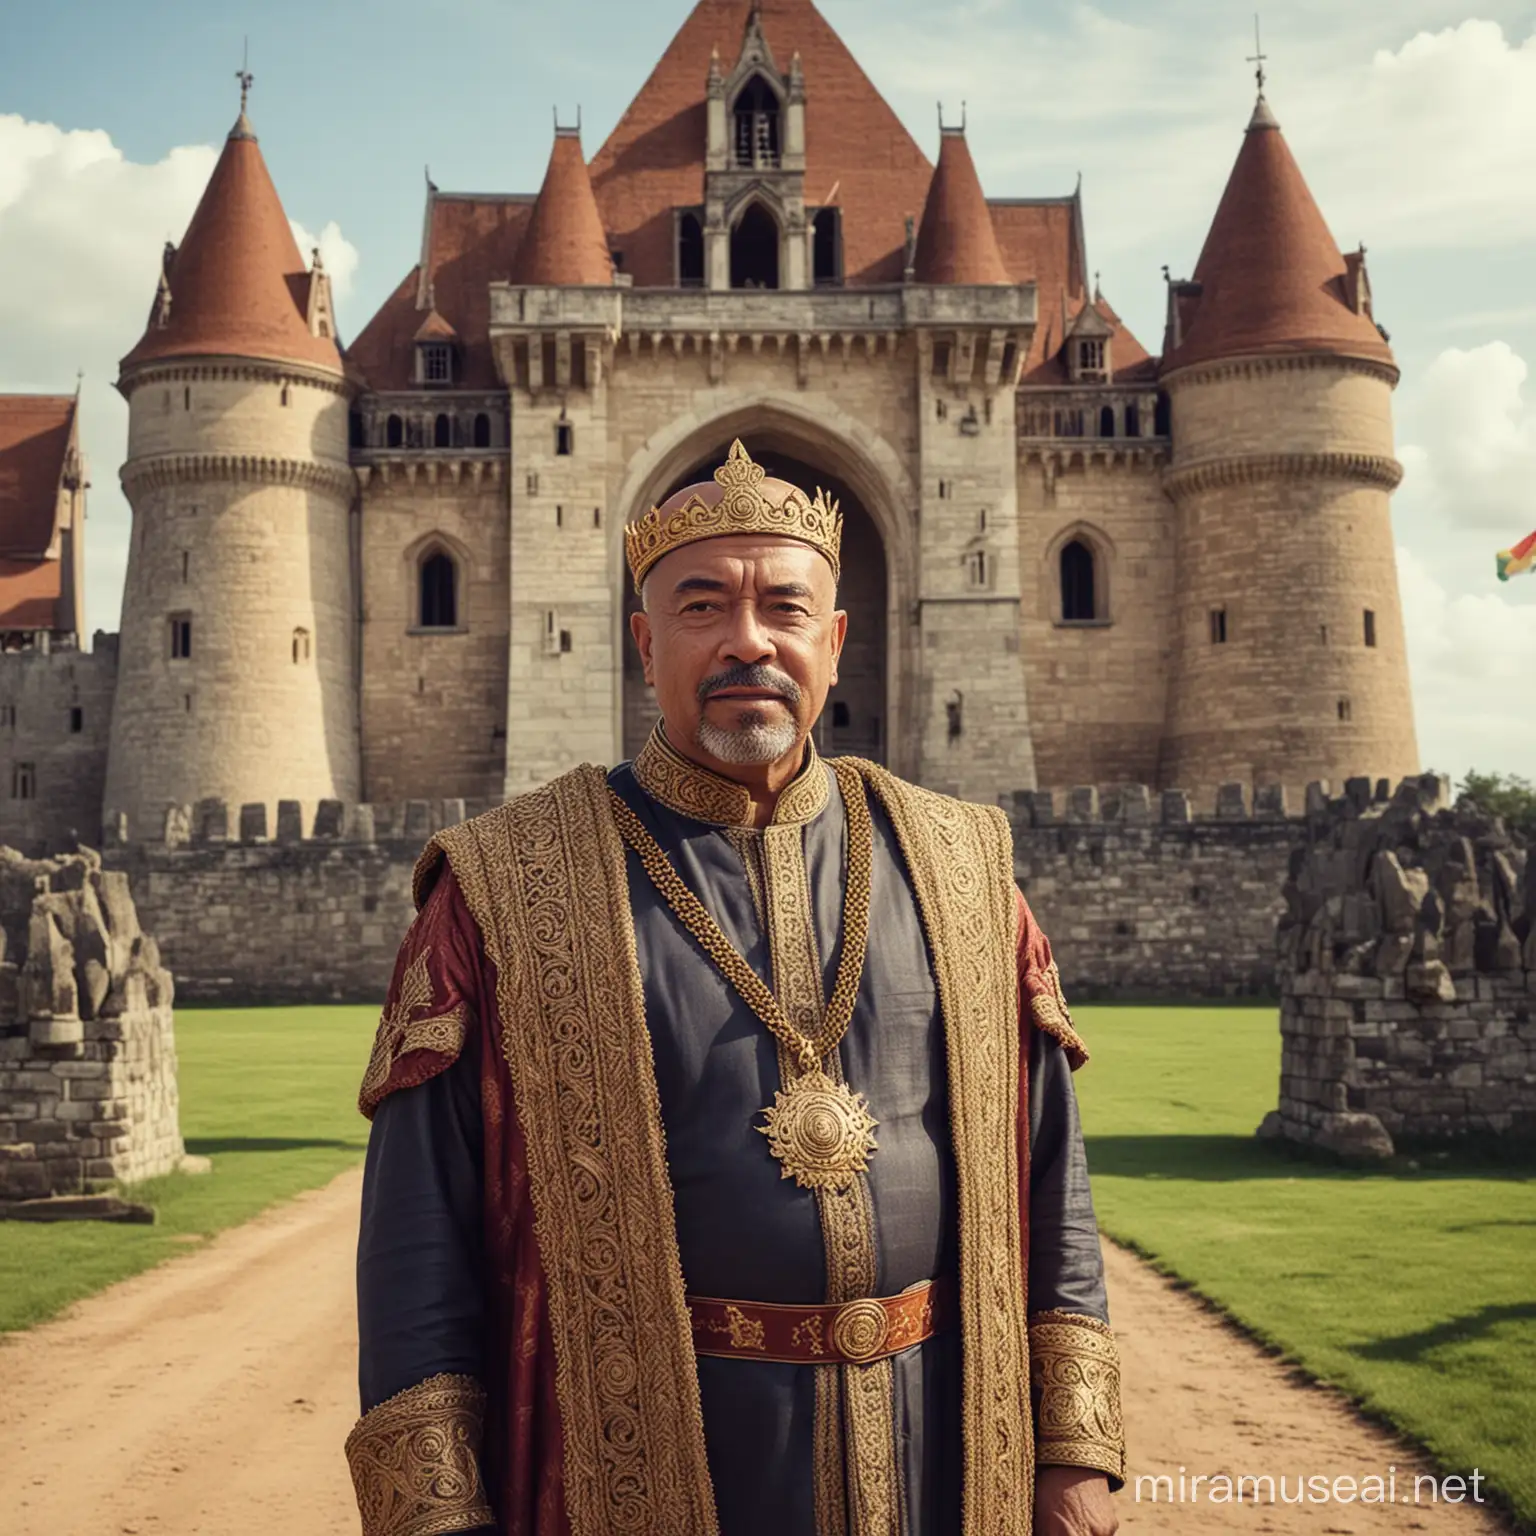 Desi Bouterse as king in front of a 13th century castle

